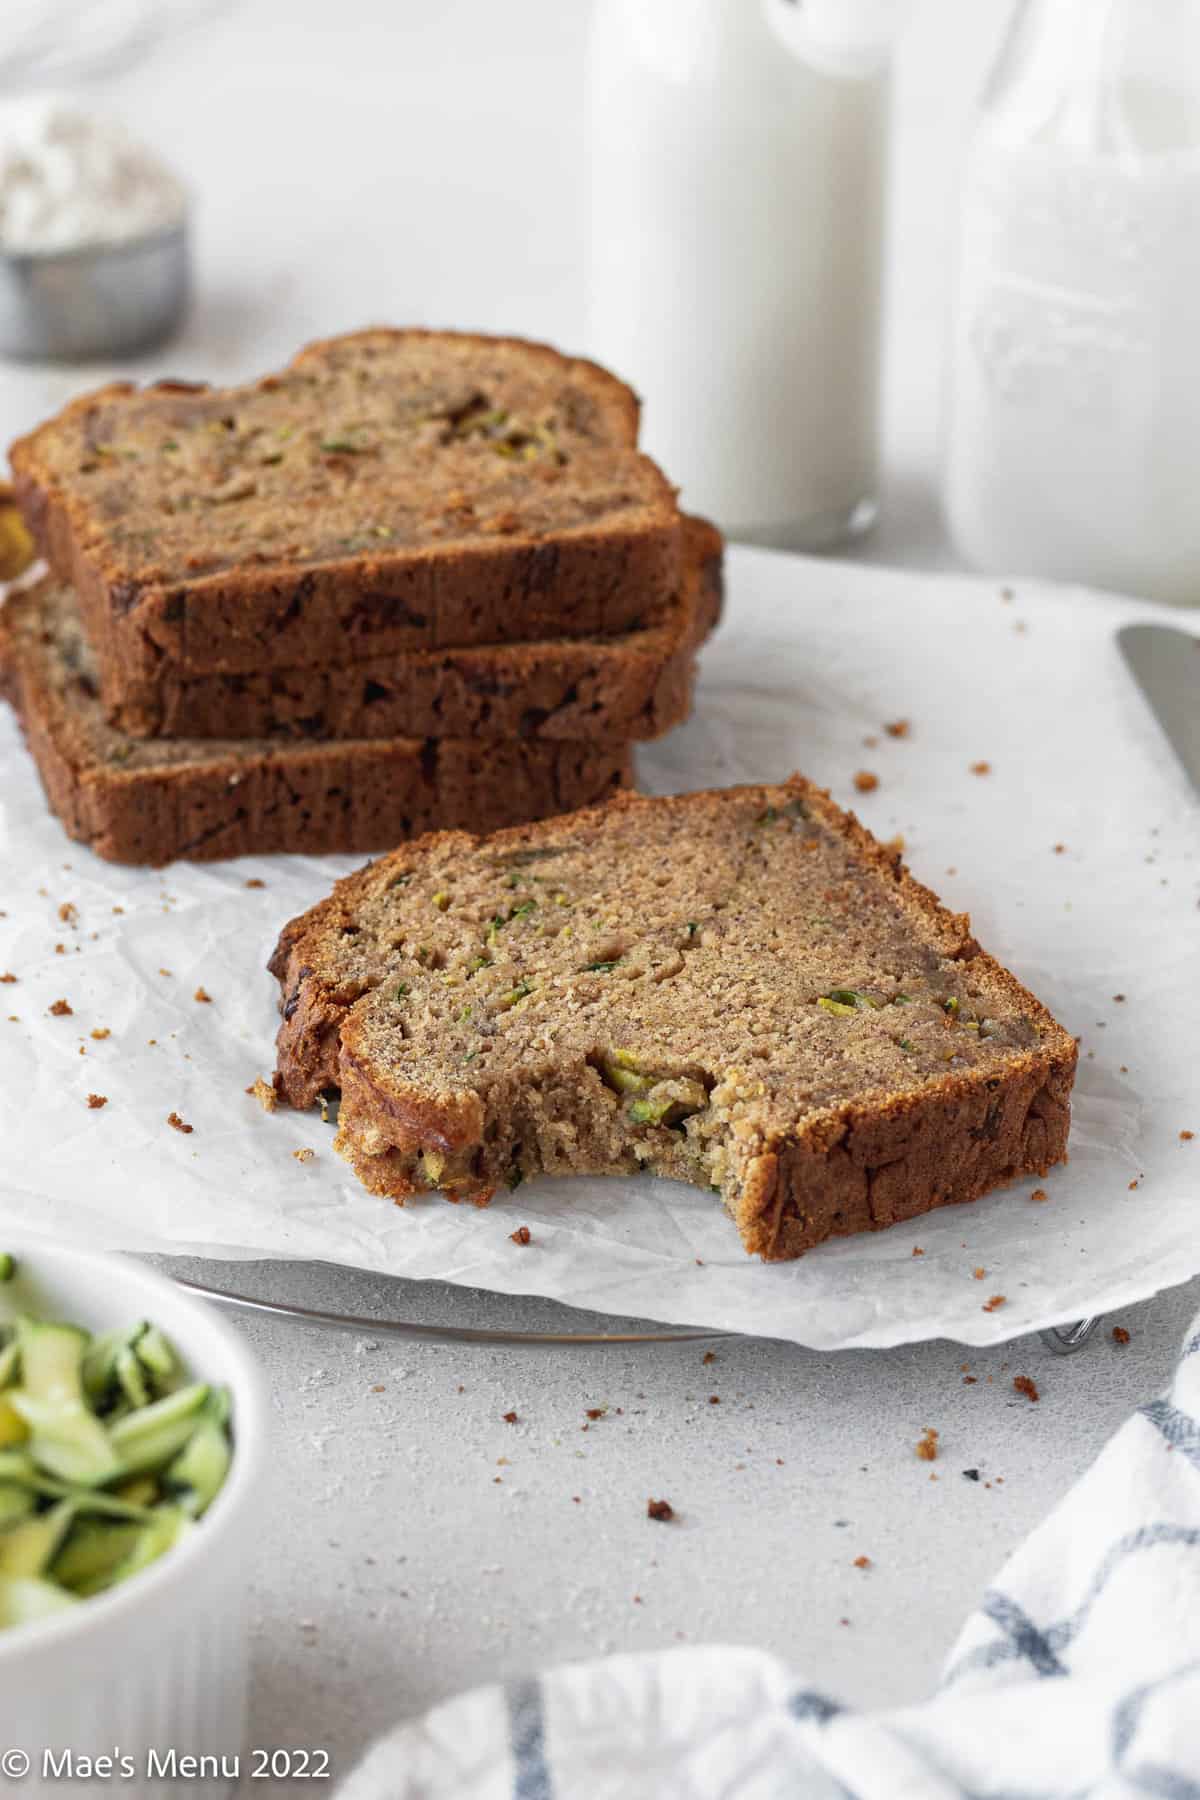 A Stack of slices of banana zucchini bread and one piece with a bite taken out of it on a white background.